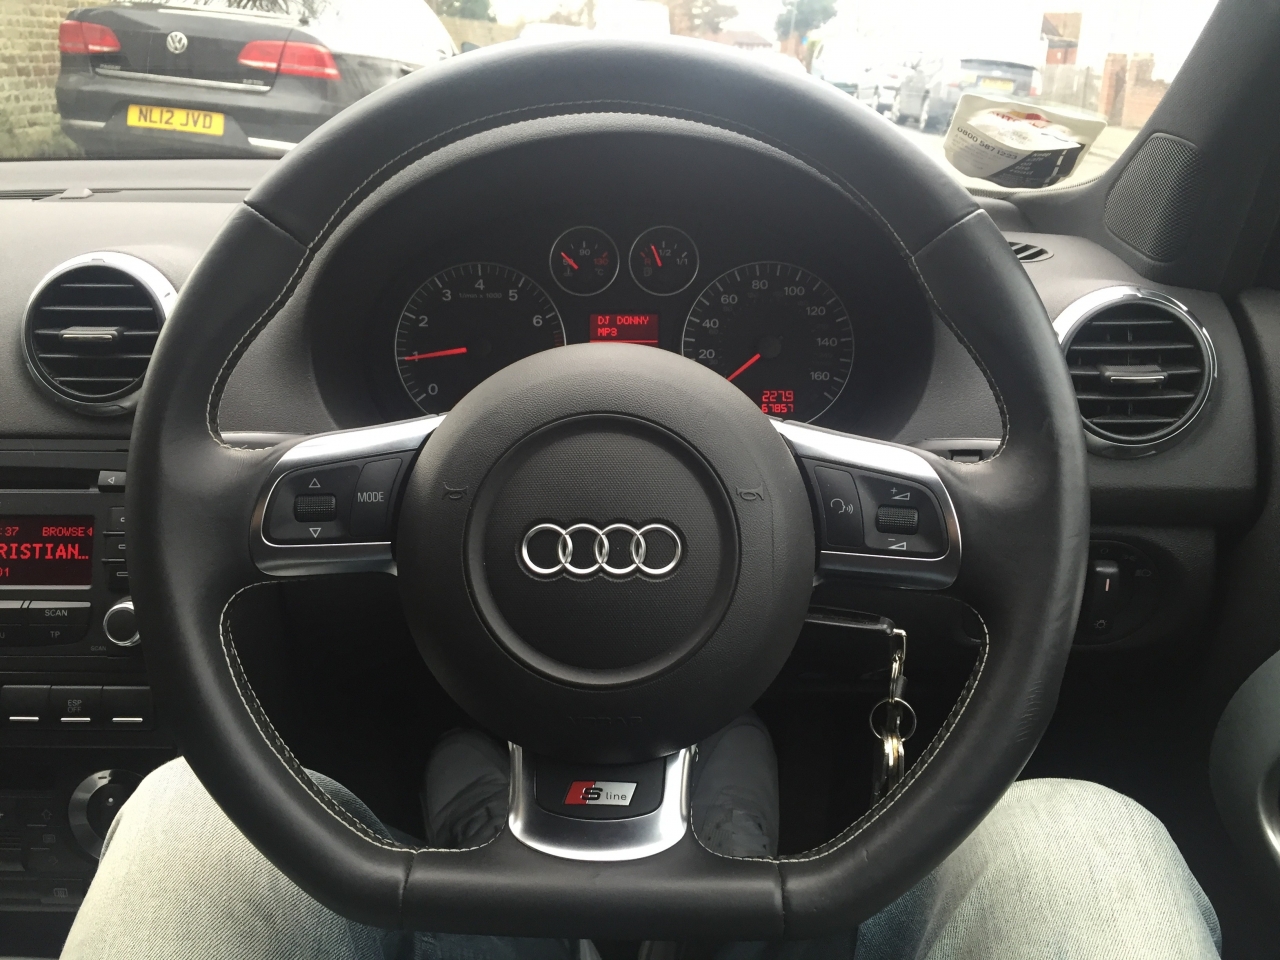 Audi - A3 Type 8P Wheels and Tyre Packages